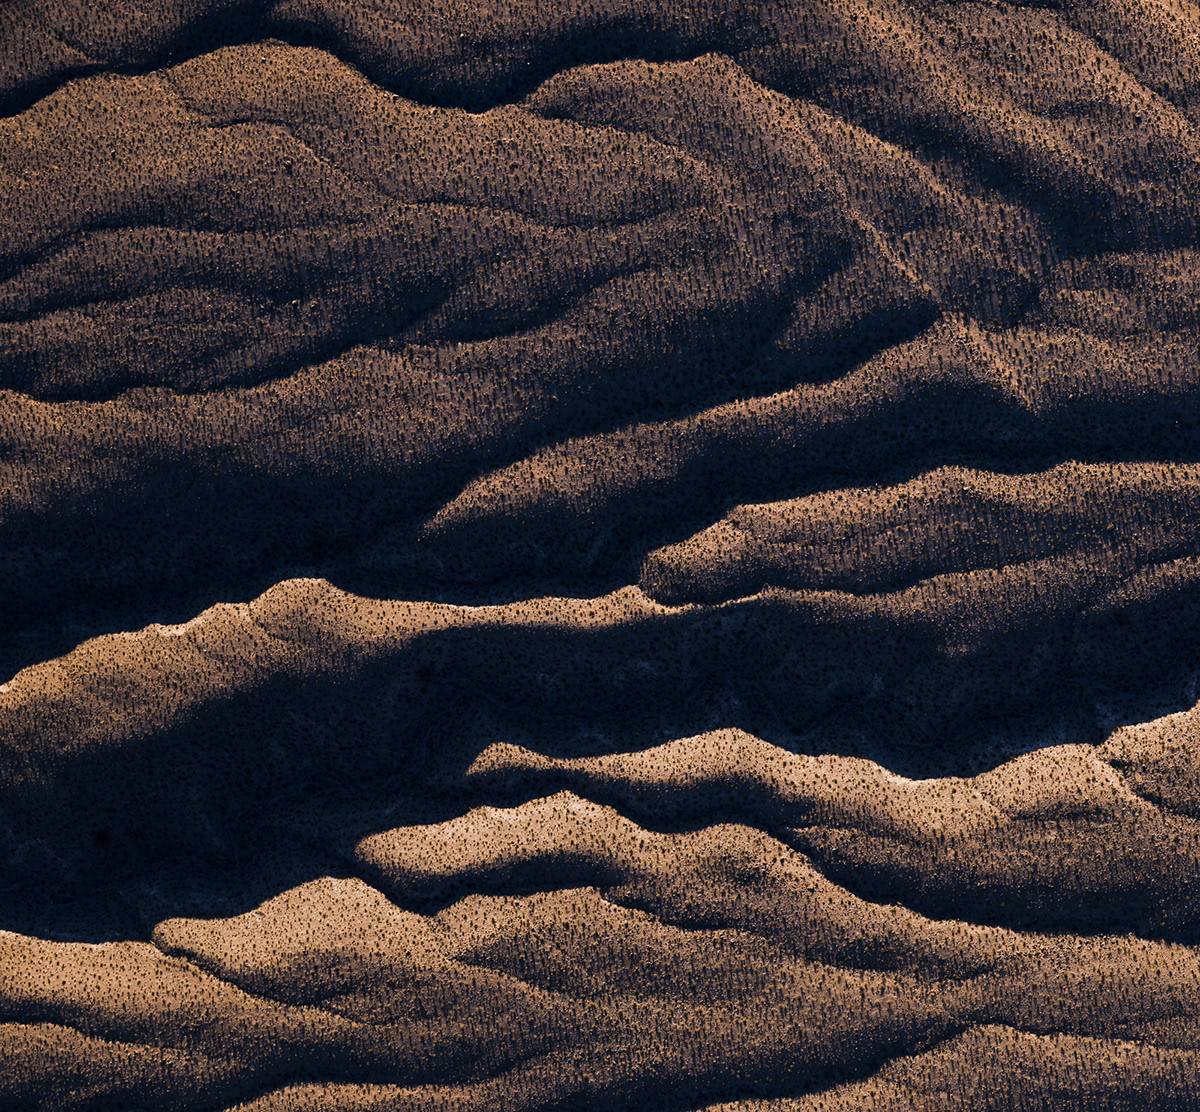 abstract aerials aerial desert images Aerial Fine Art california deserts sand corporate artwork Death Valley Mitch Rouse Aerials national park aerials phase one medium format sand dunes aerial